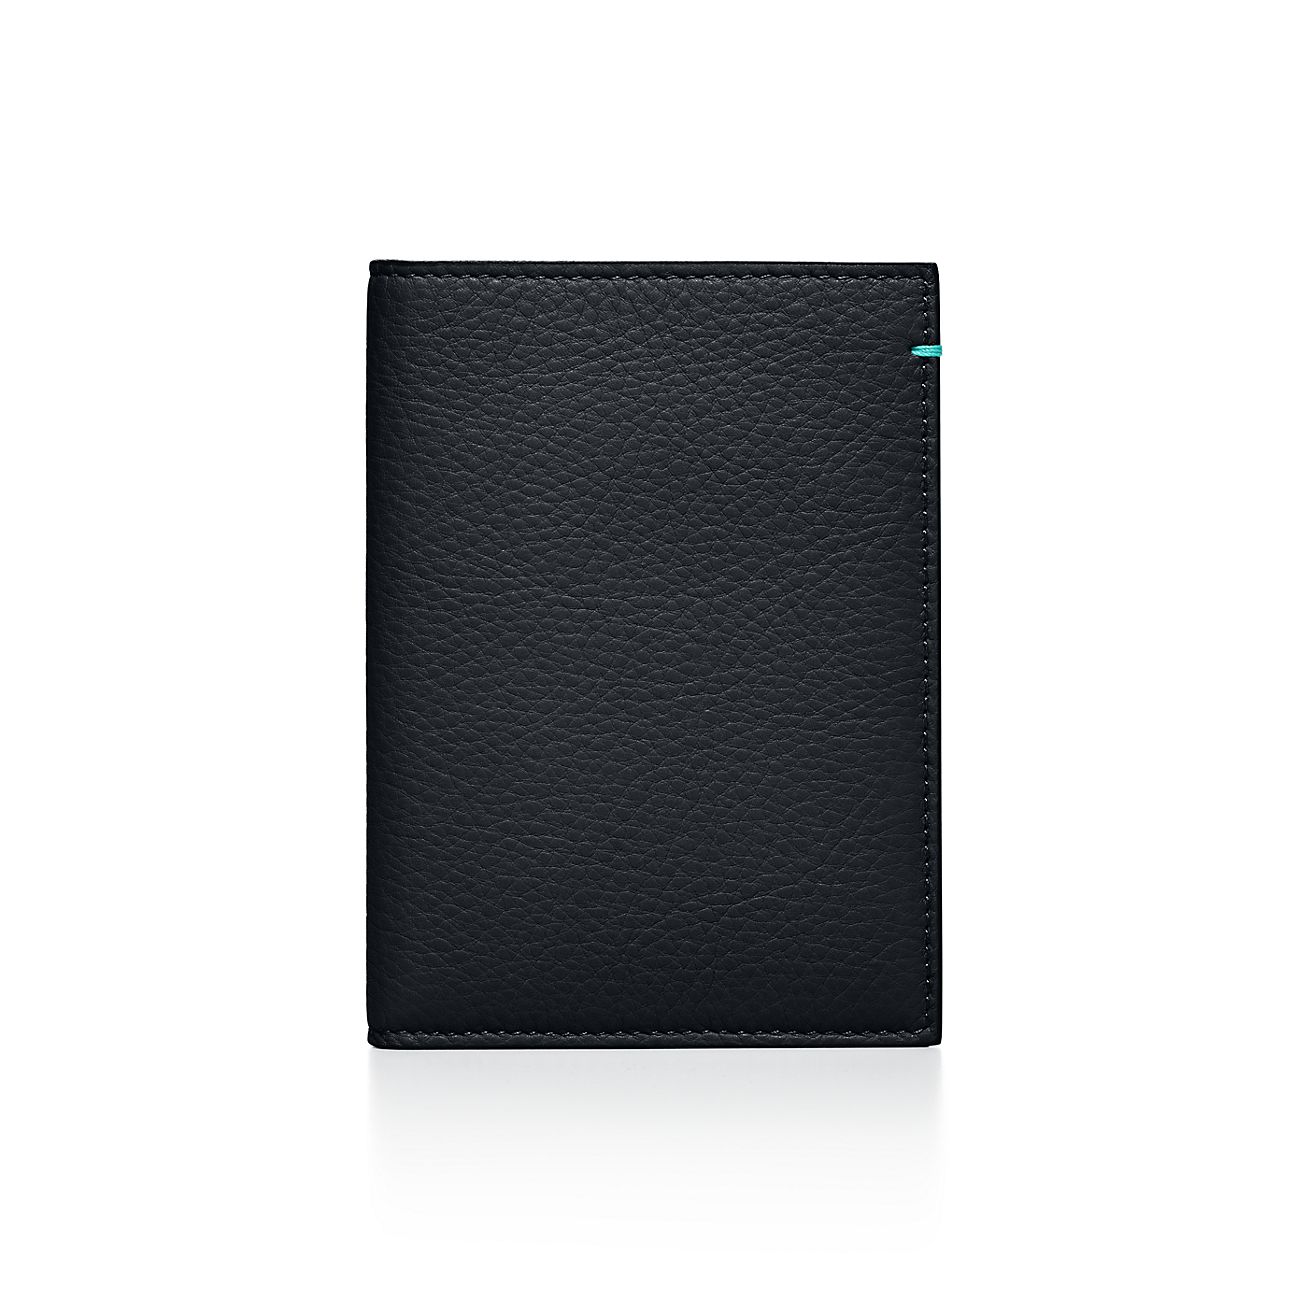 Jewelry Adviser Gifts Blue Leather Passport Cover 